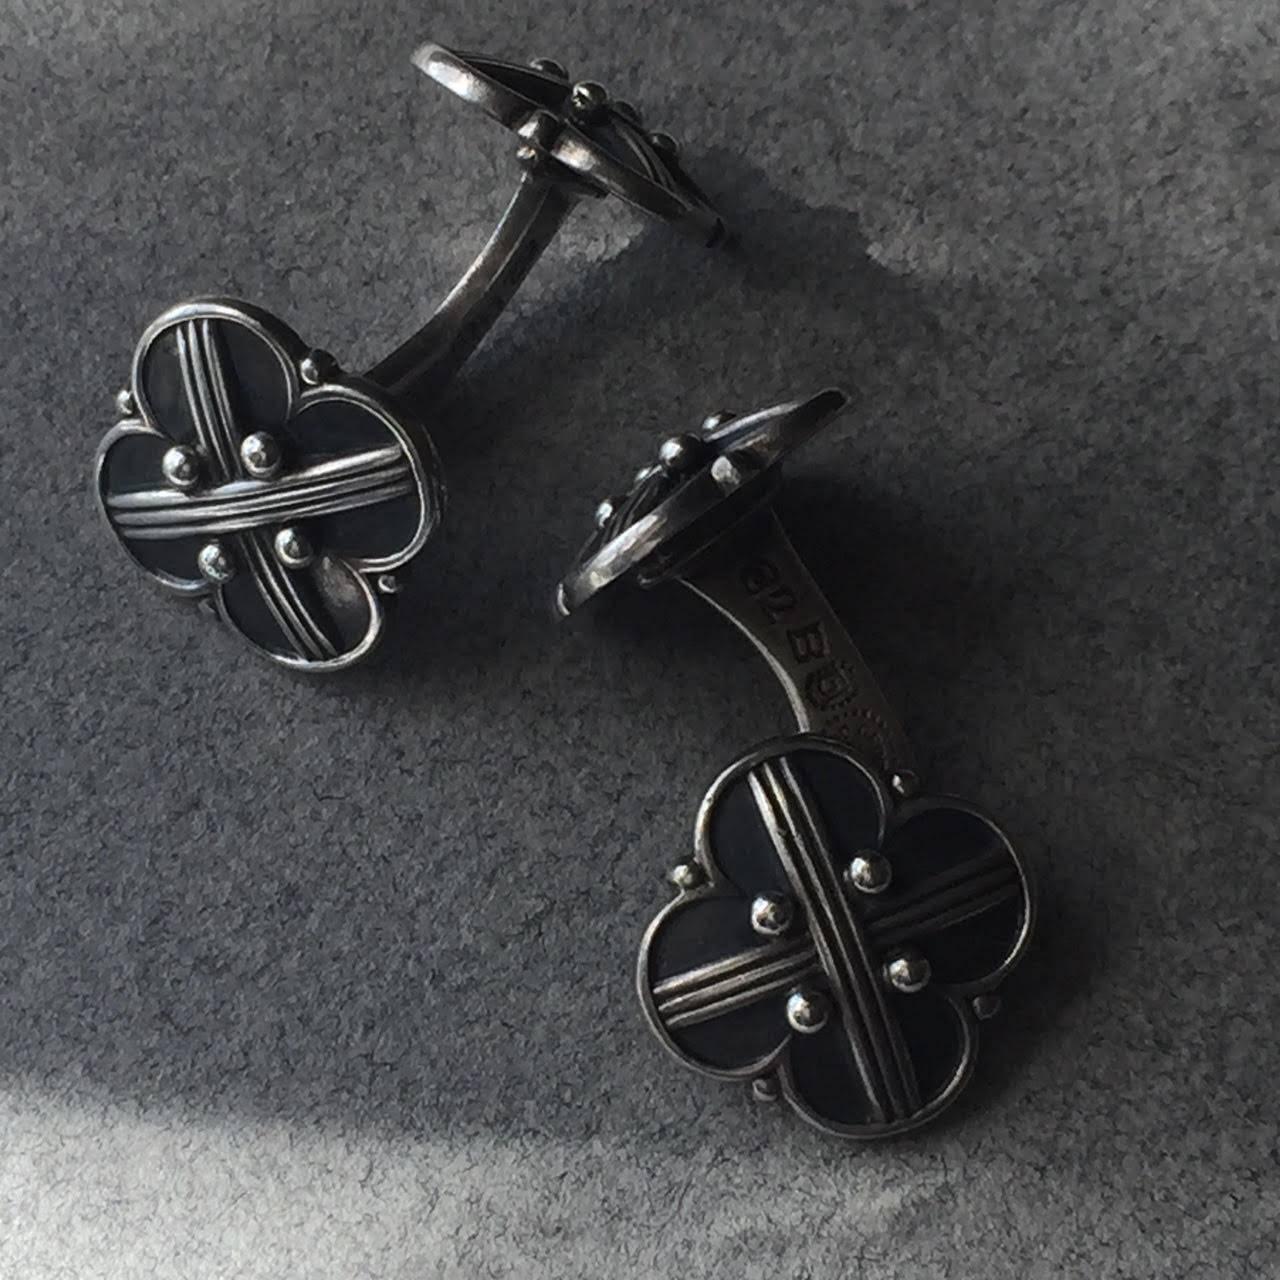 Georg Jensen Art Deco Sterling Silver Cufflinks, No. 62B.

Intricately detailed and in very good condition.